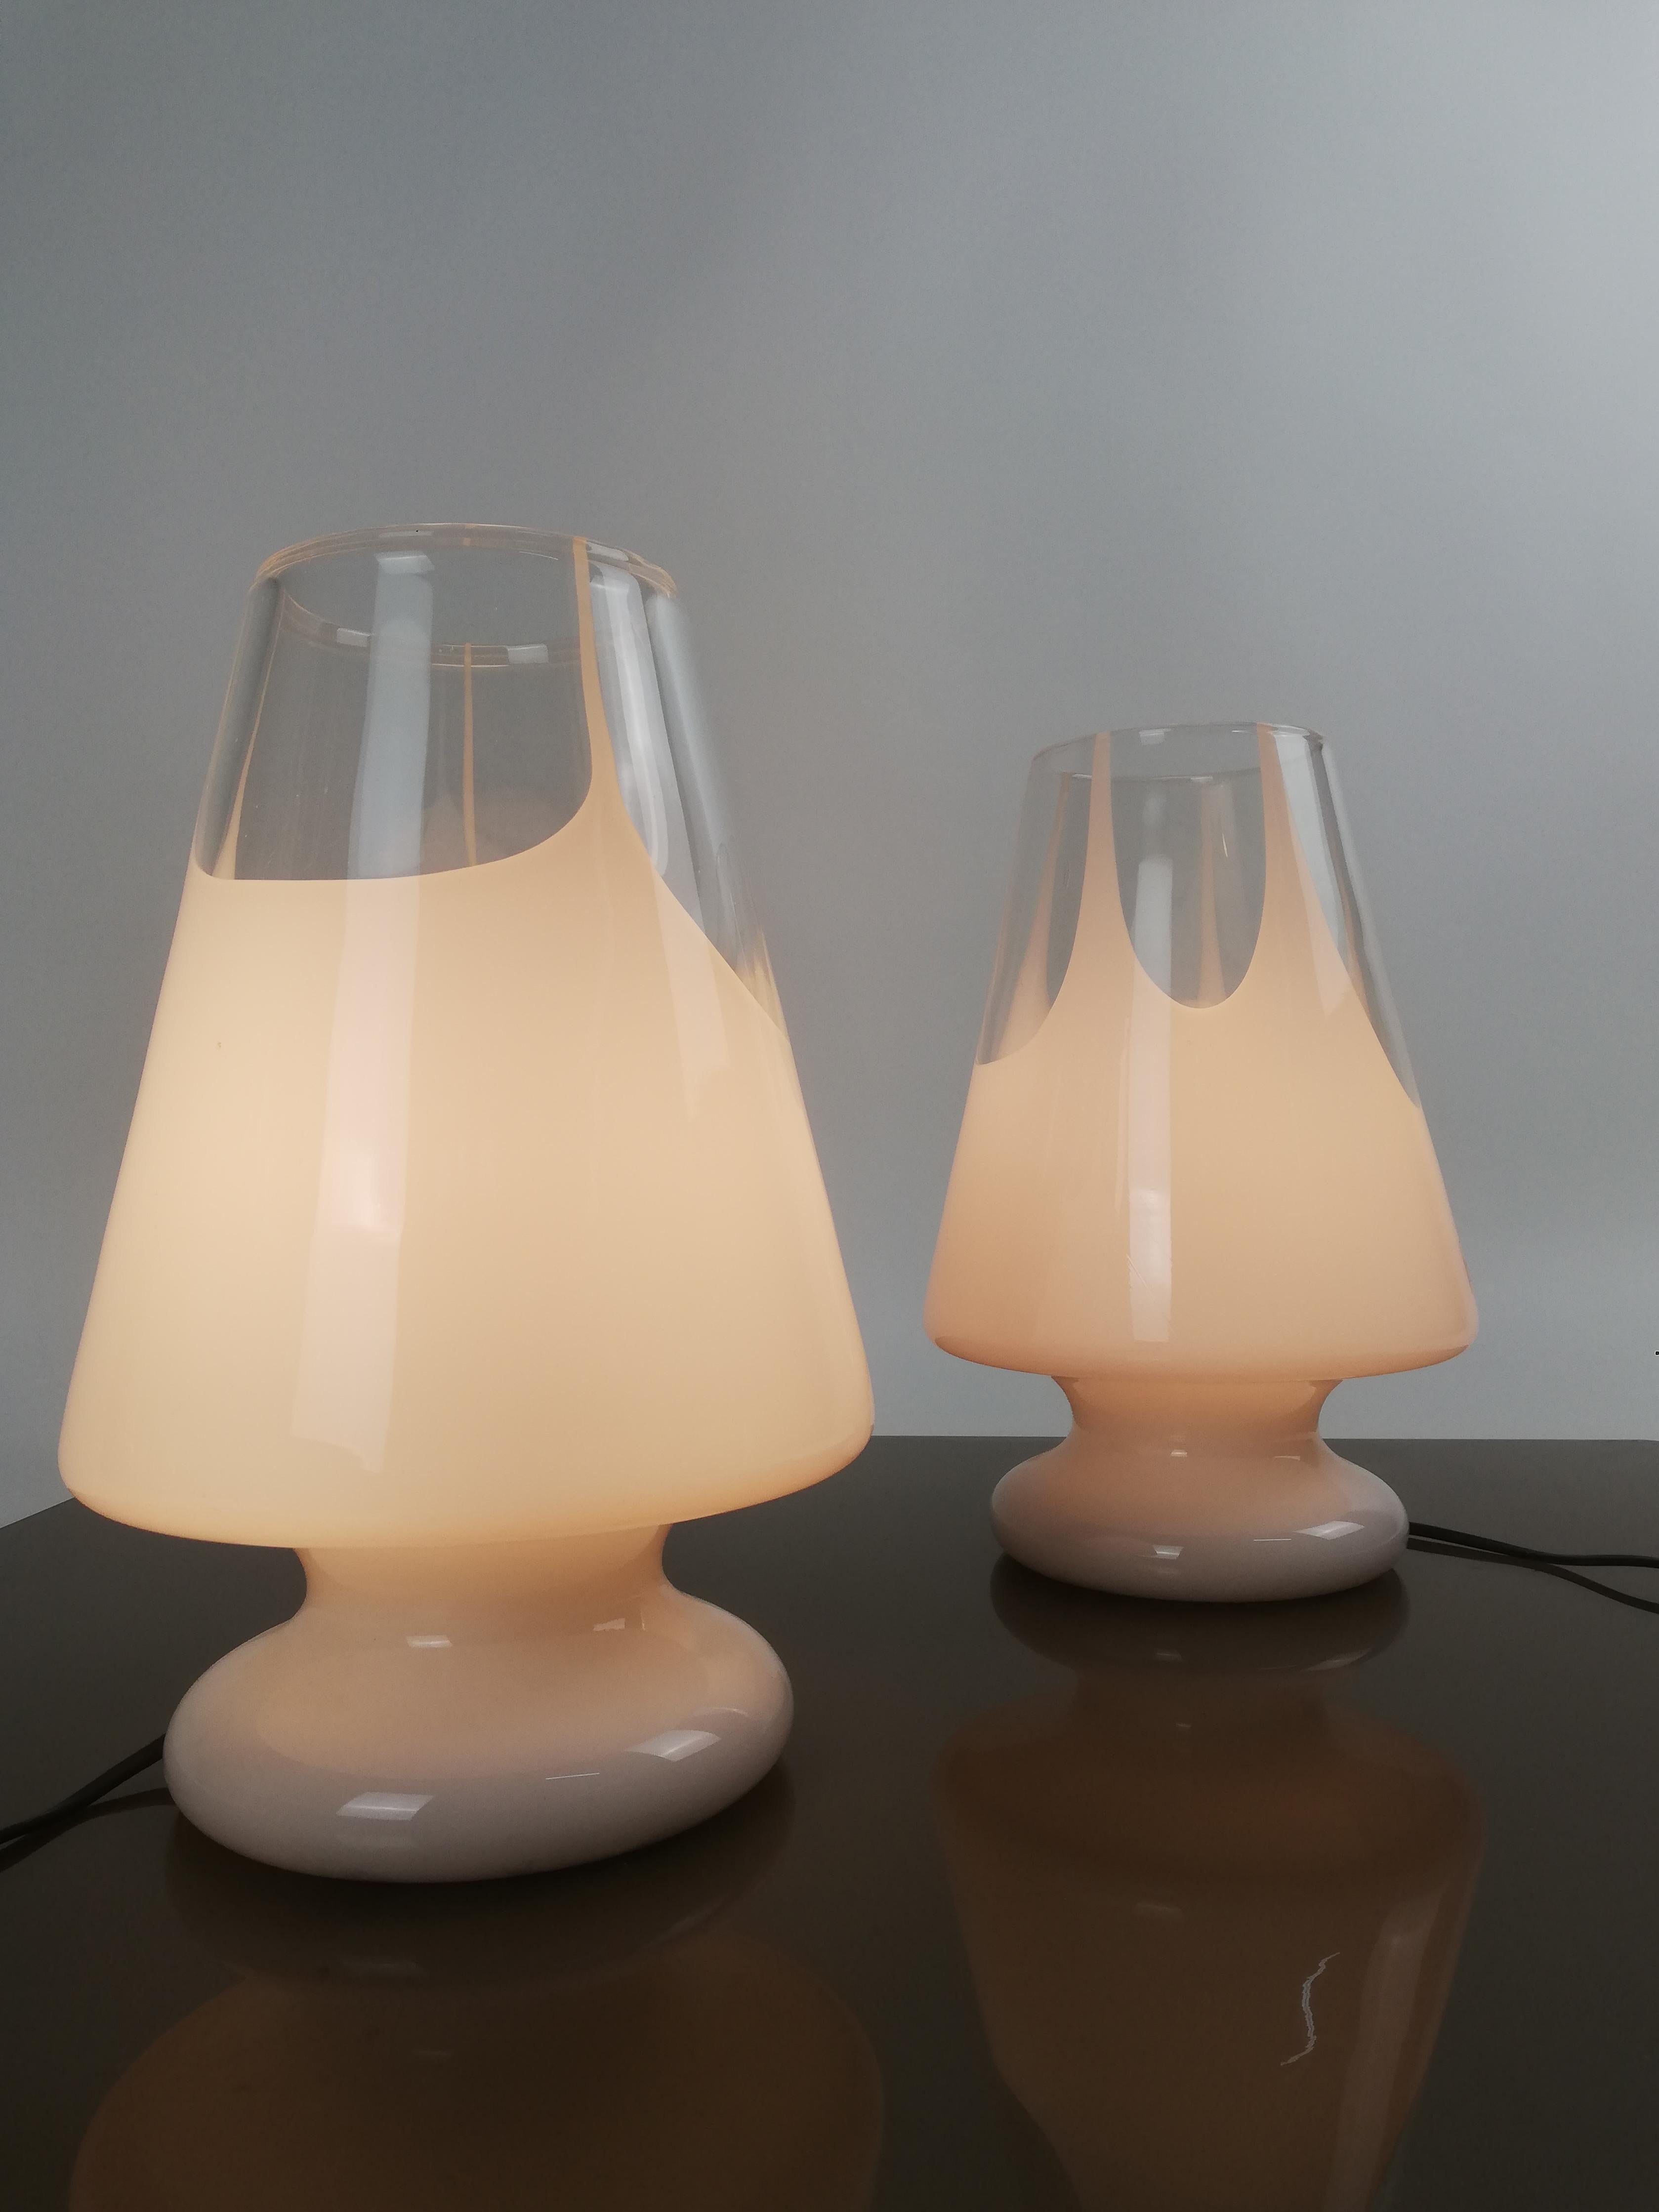 Pair of Table Lamps by Prima Luce in White Artistic Murano Glass, Italy, 1970s For Sale 1